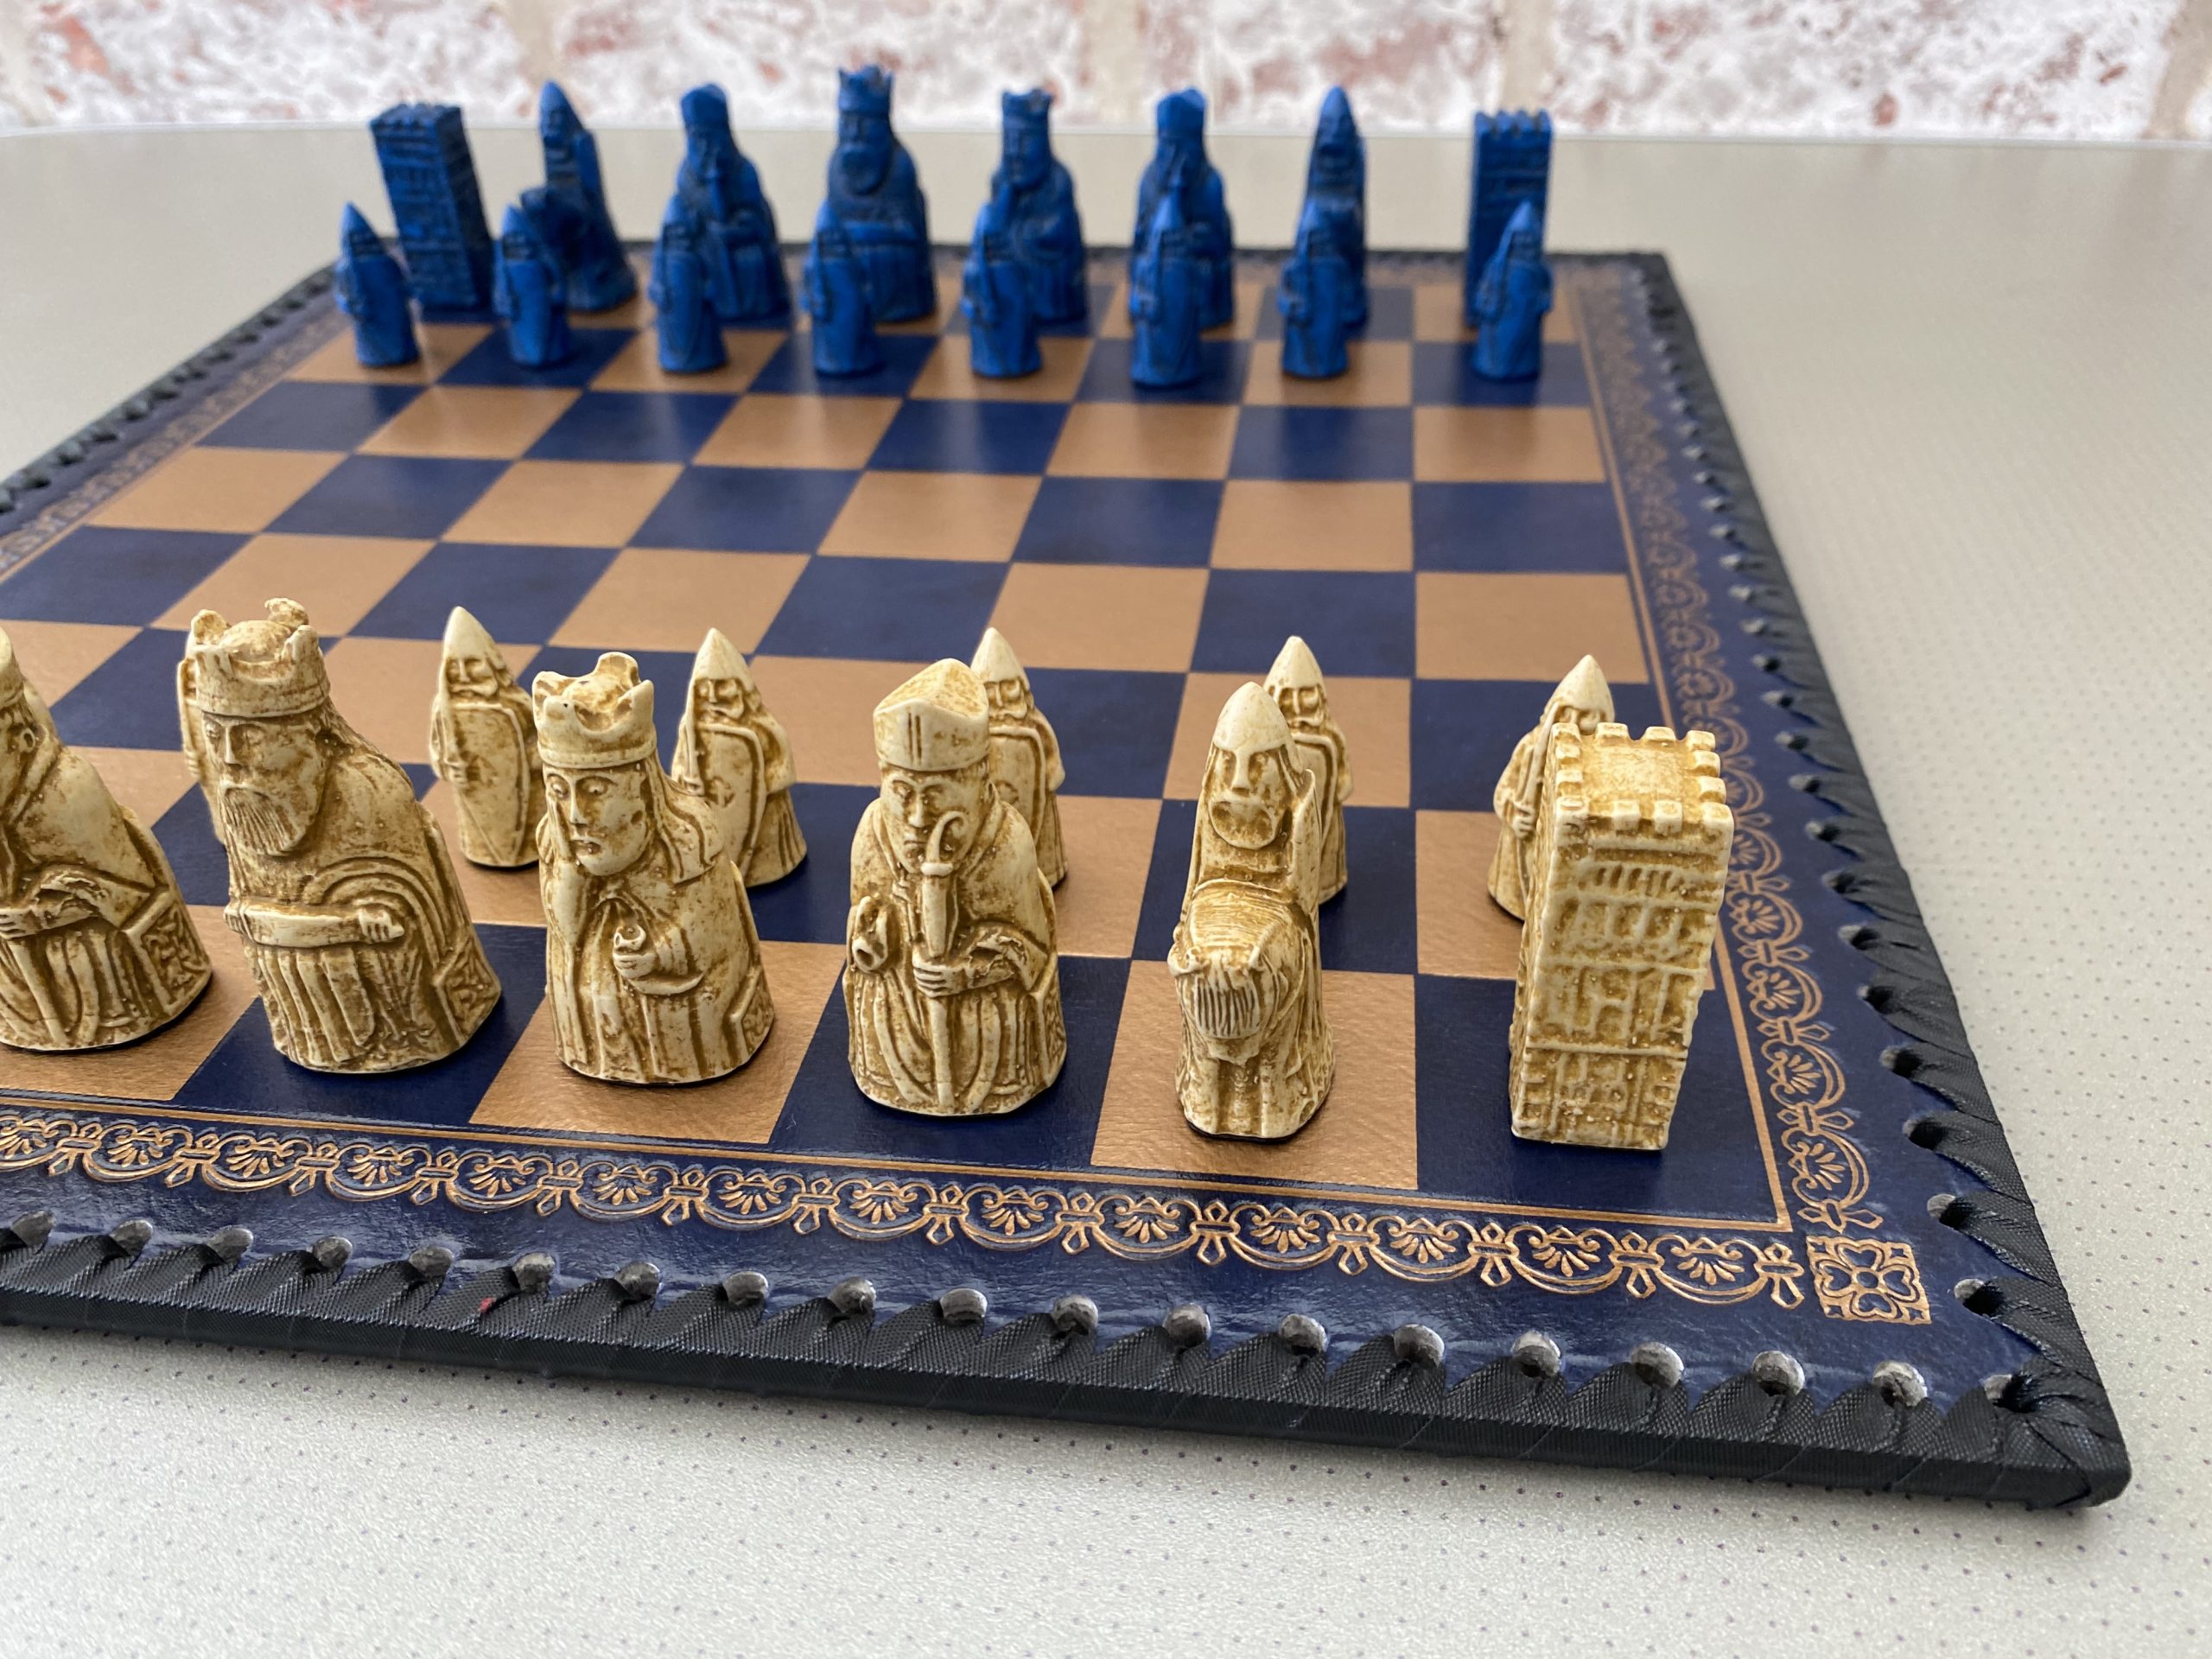 ChessBaron | Staunton Chess Sets, Heritage Chess, Chess Pieces, Boards ...